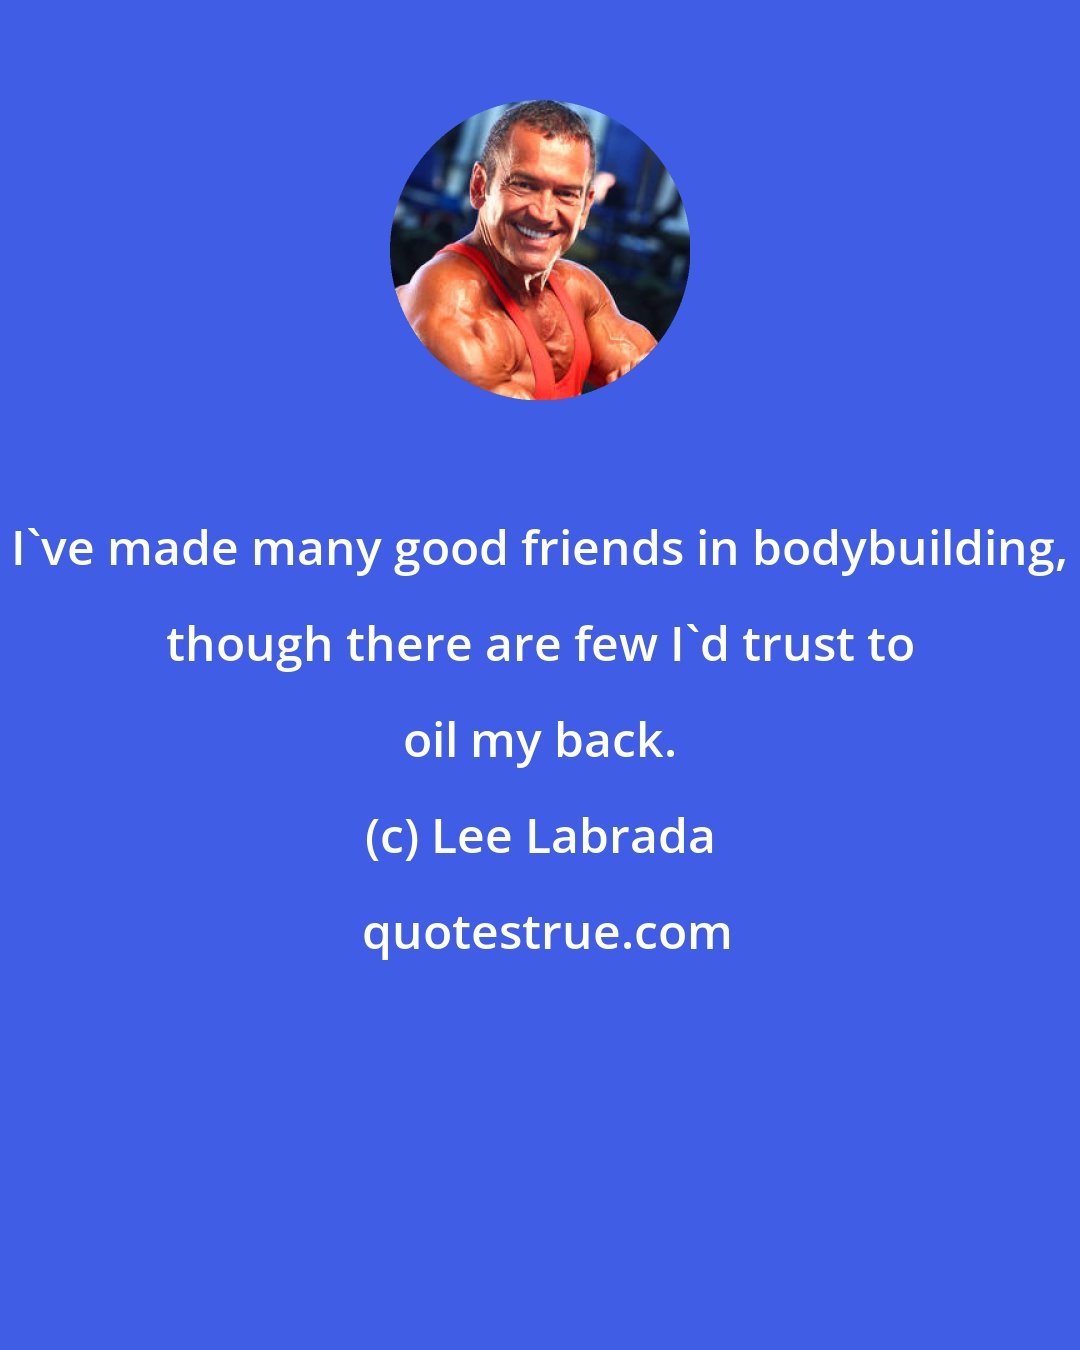 Lee Labrada: I've made many good friends in bodybuilding, though there are few I'd trust to oil my back.